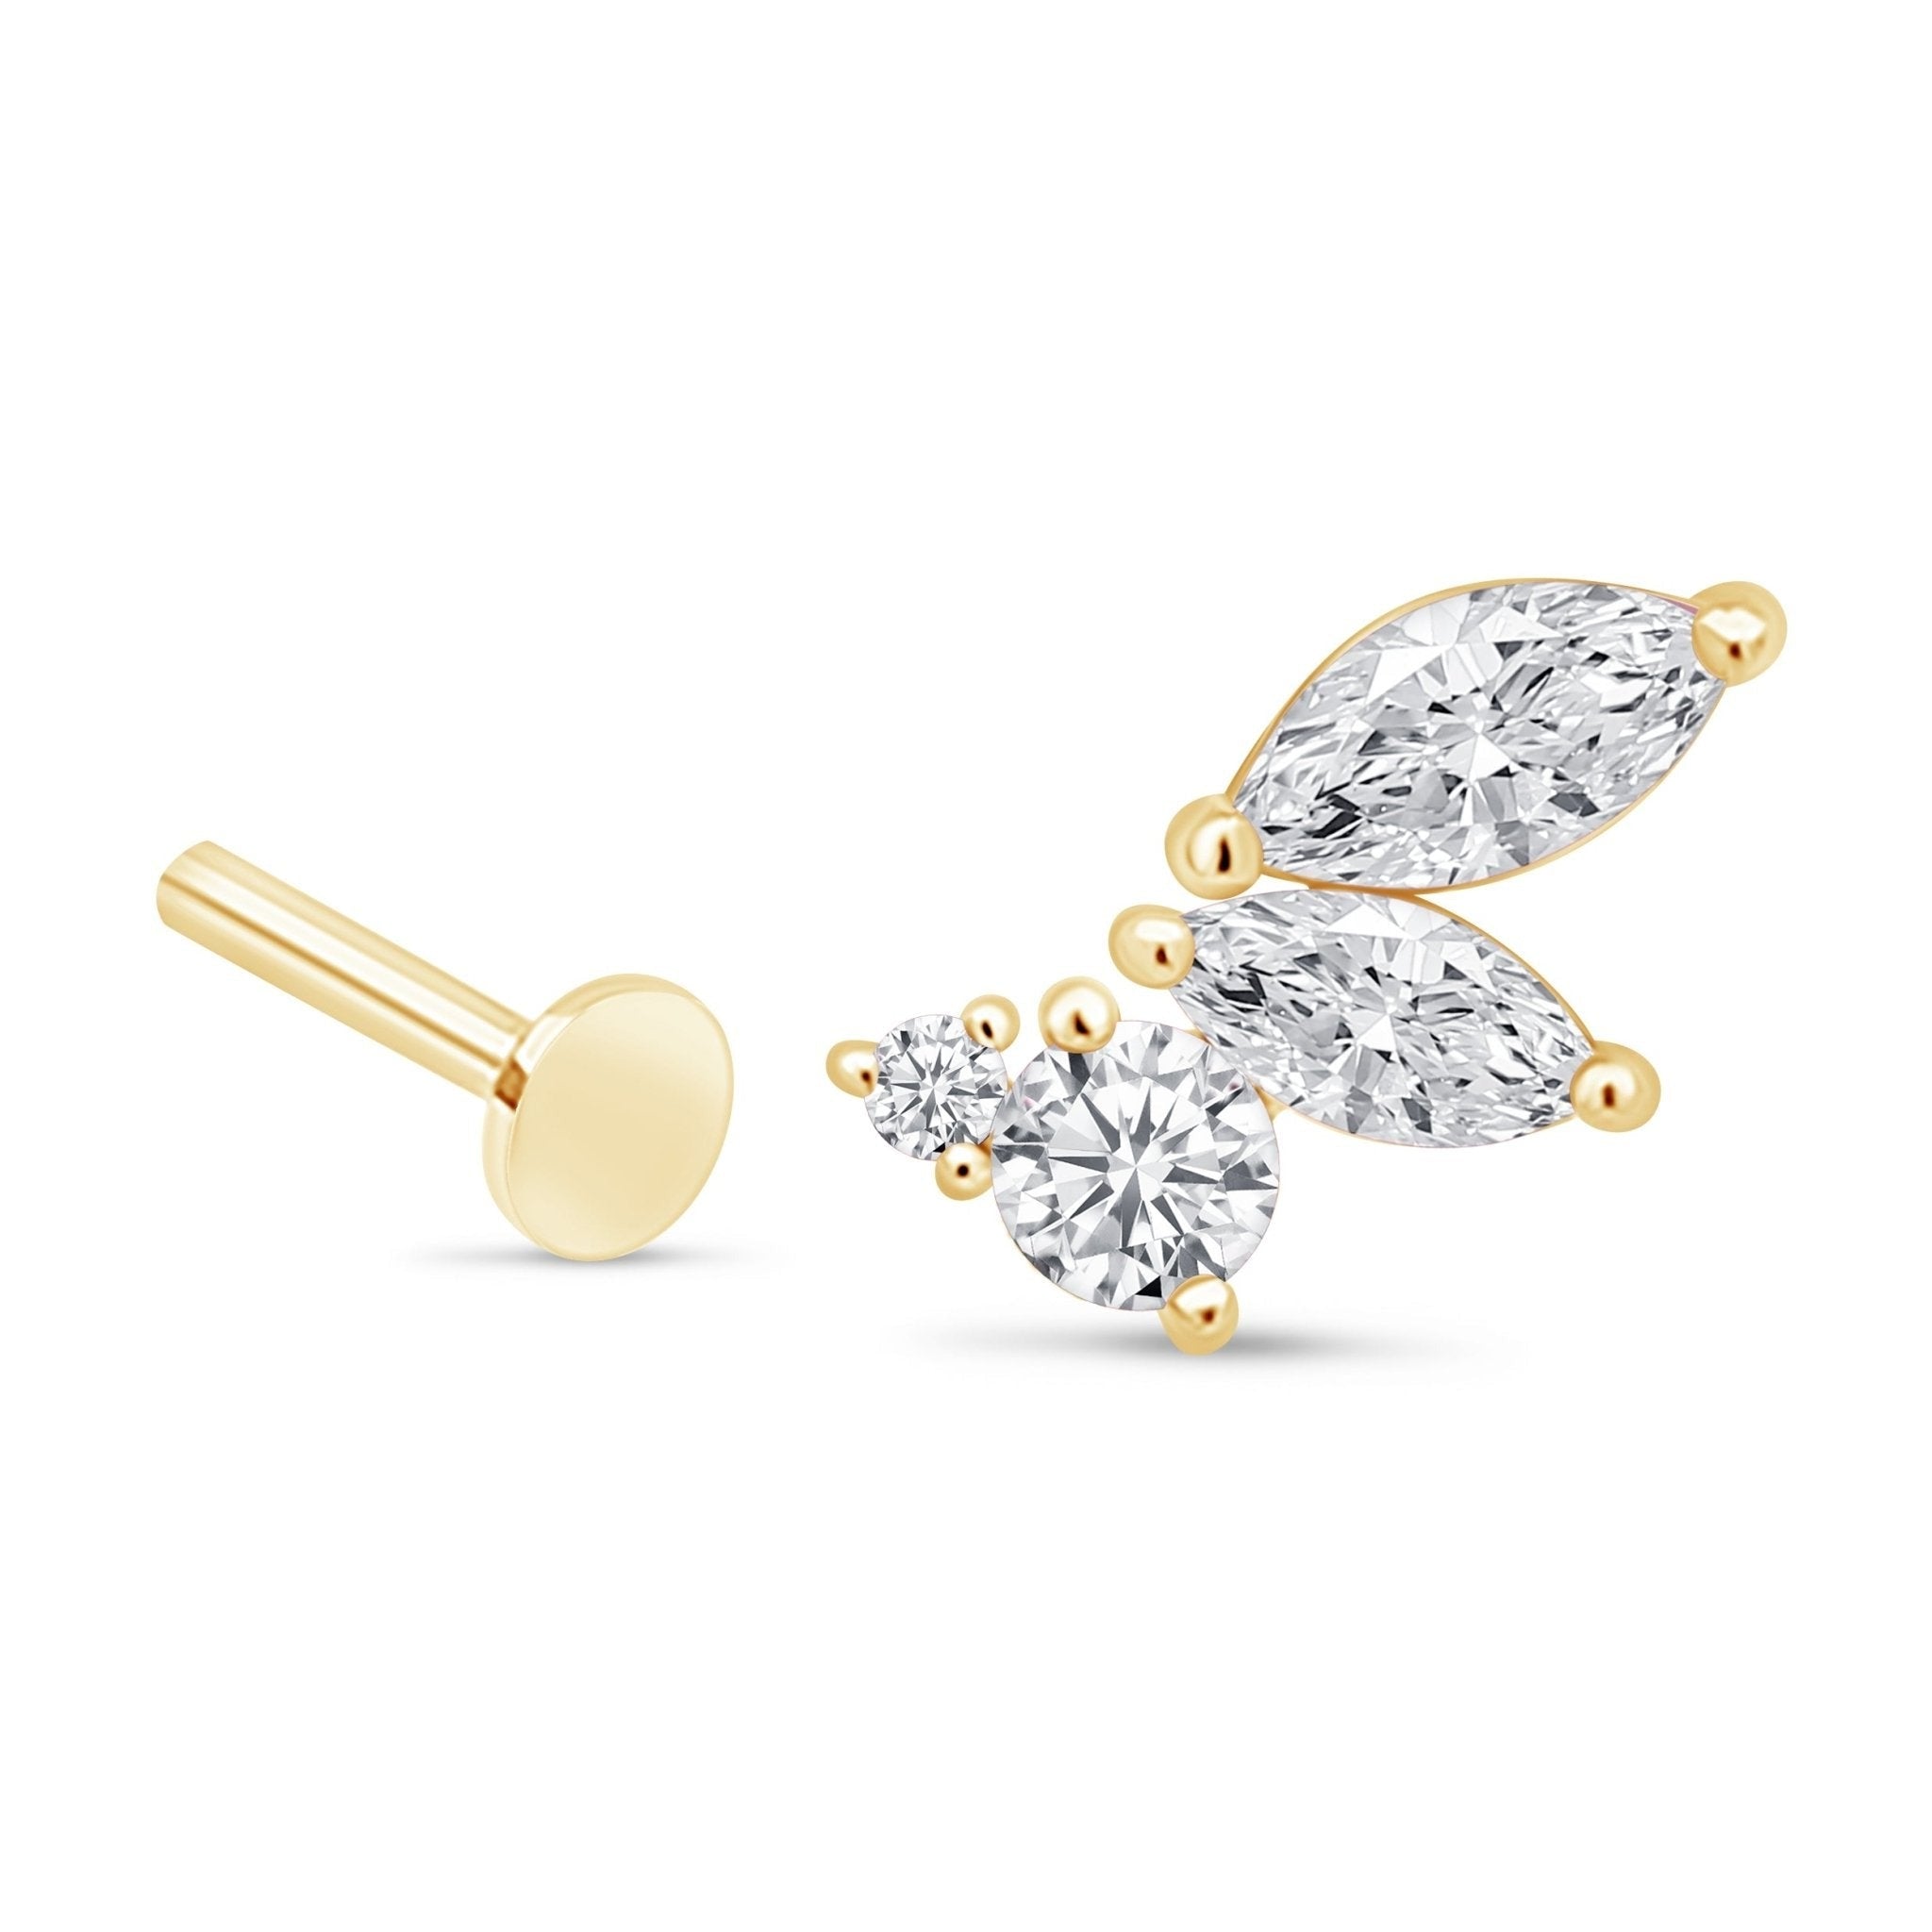 Marquise Wing Flat Back Earring Earrings Estella Collection #product_description# 18577 test test mechanic #tag4# #tag5# #tag6# #tag7# #tag8# #tag9# #tag10#